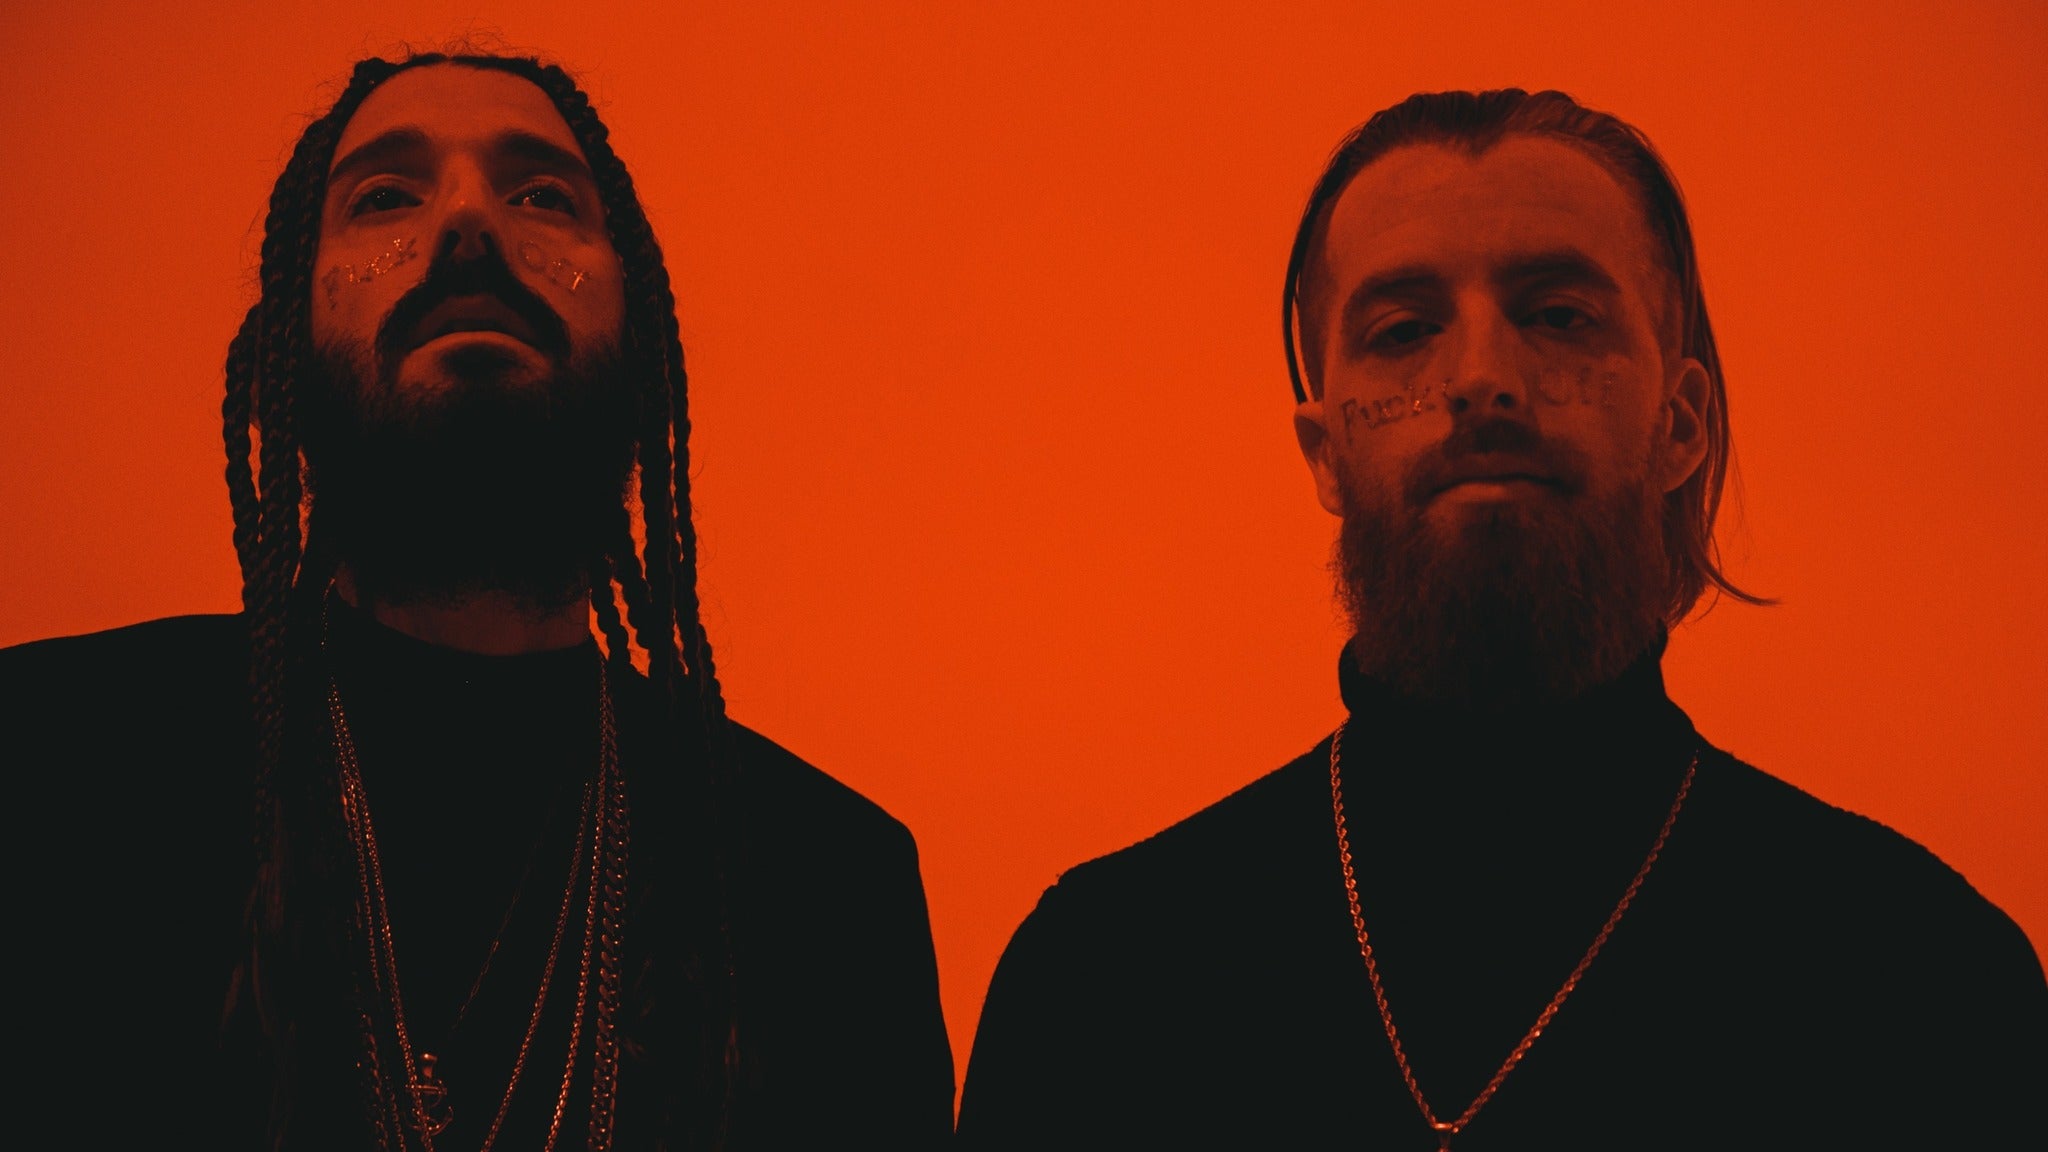 Missio - #gimmeakiss Tour in New York promo photo for Artist presale offer code